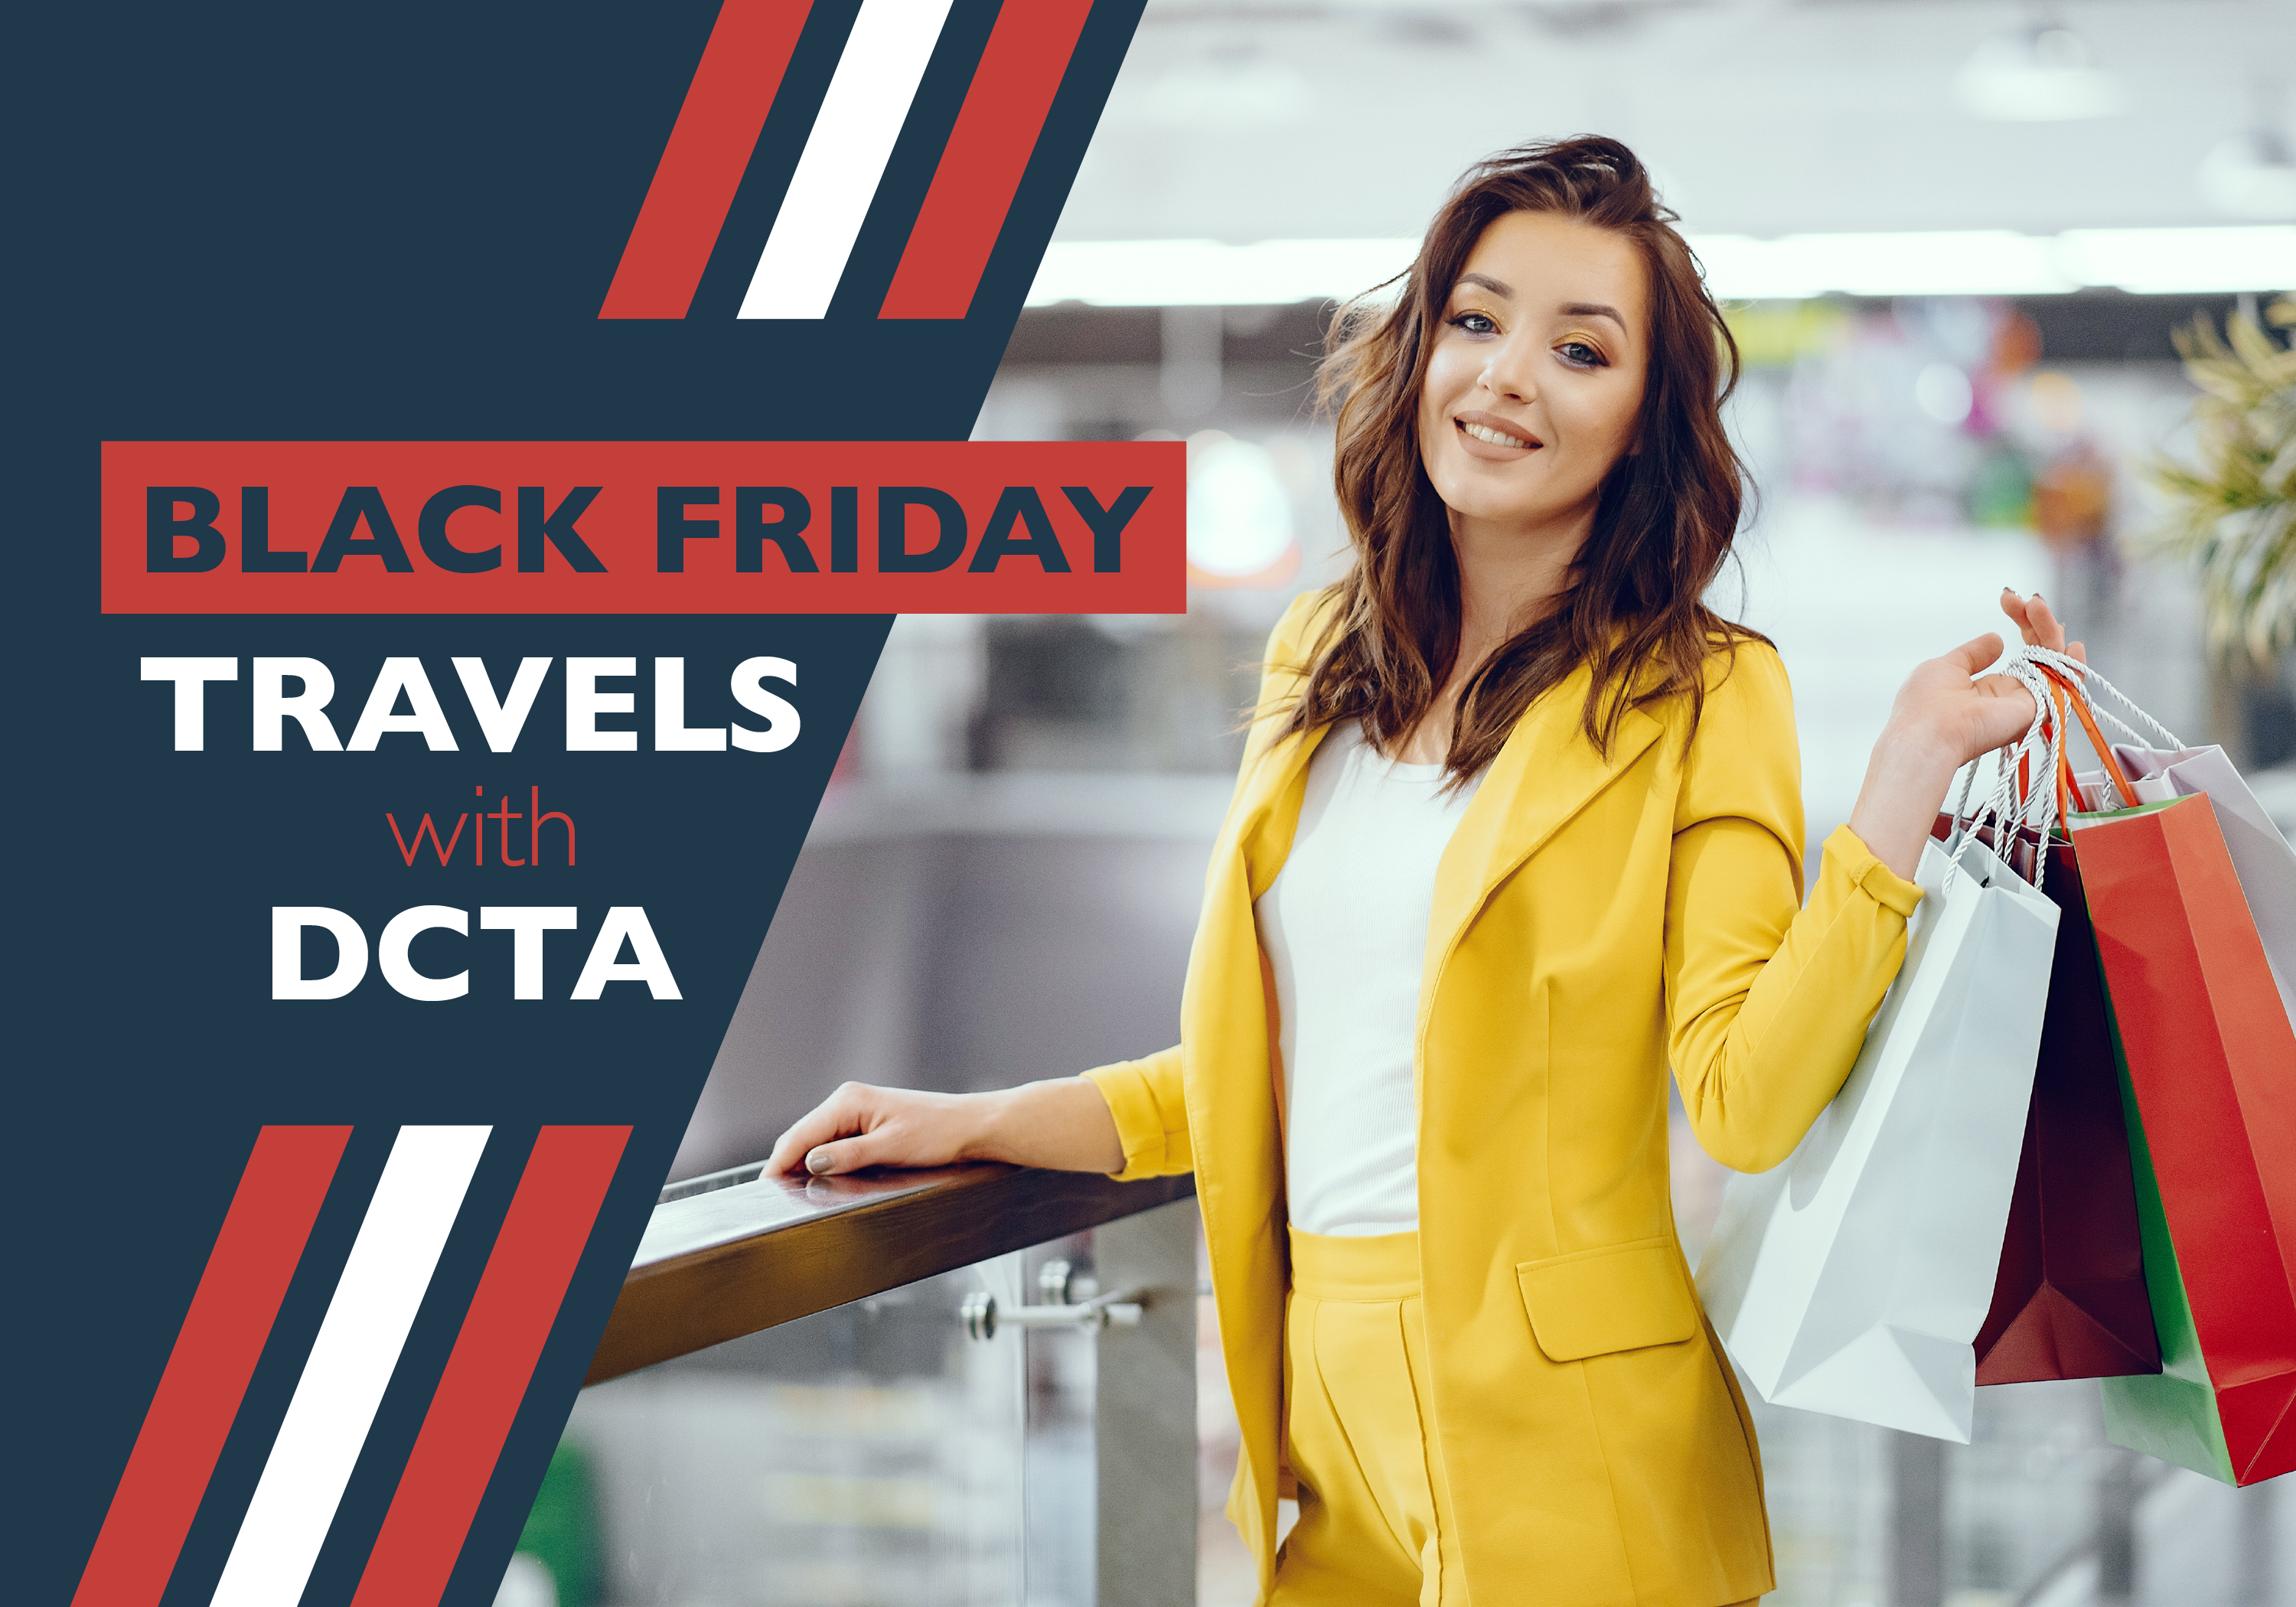 #RideDCTA to get to your 2019 Black Friday Deals